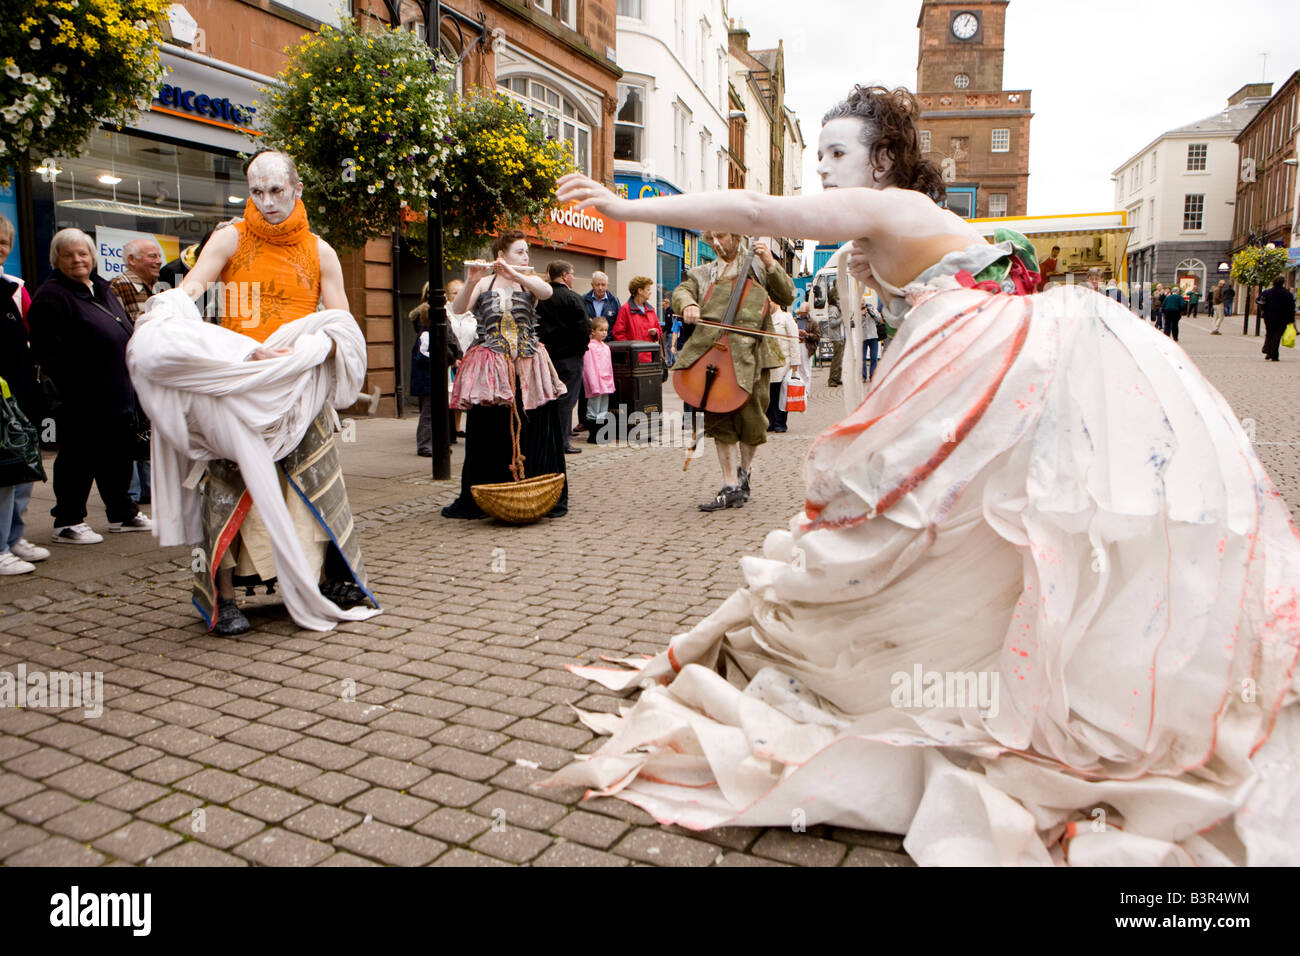 Gaelforce Arts Festival Oceanall over performing street theatre in Dumfries town centre Scotland UK Stock Photo